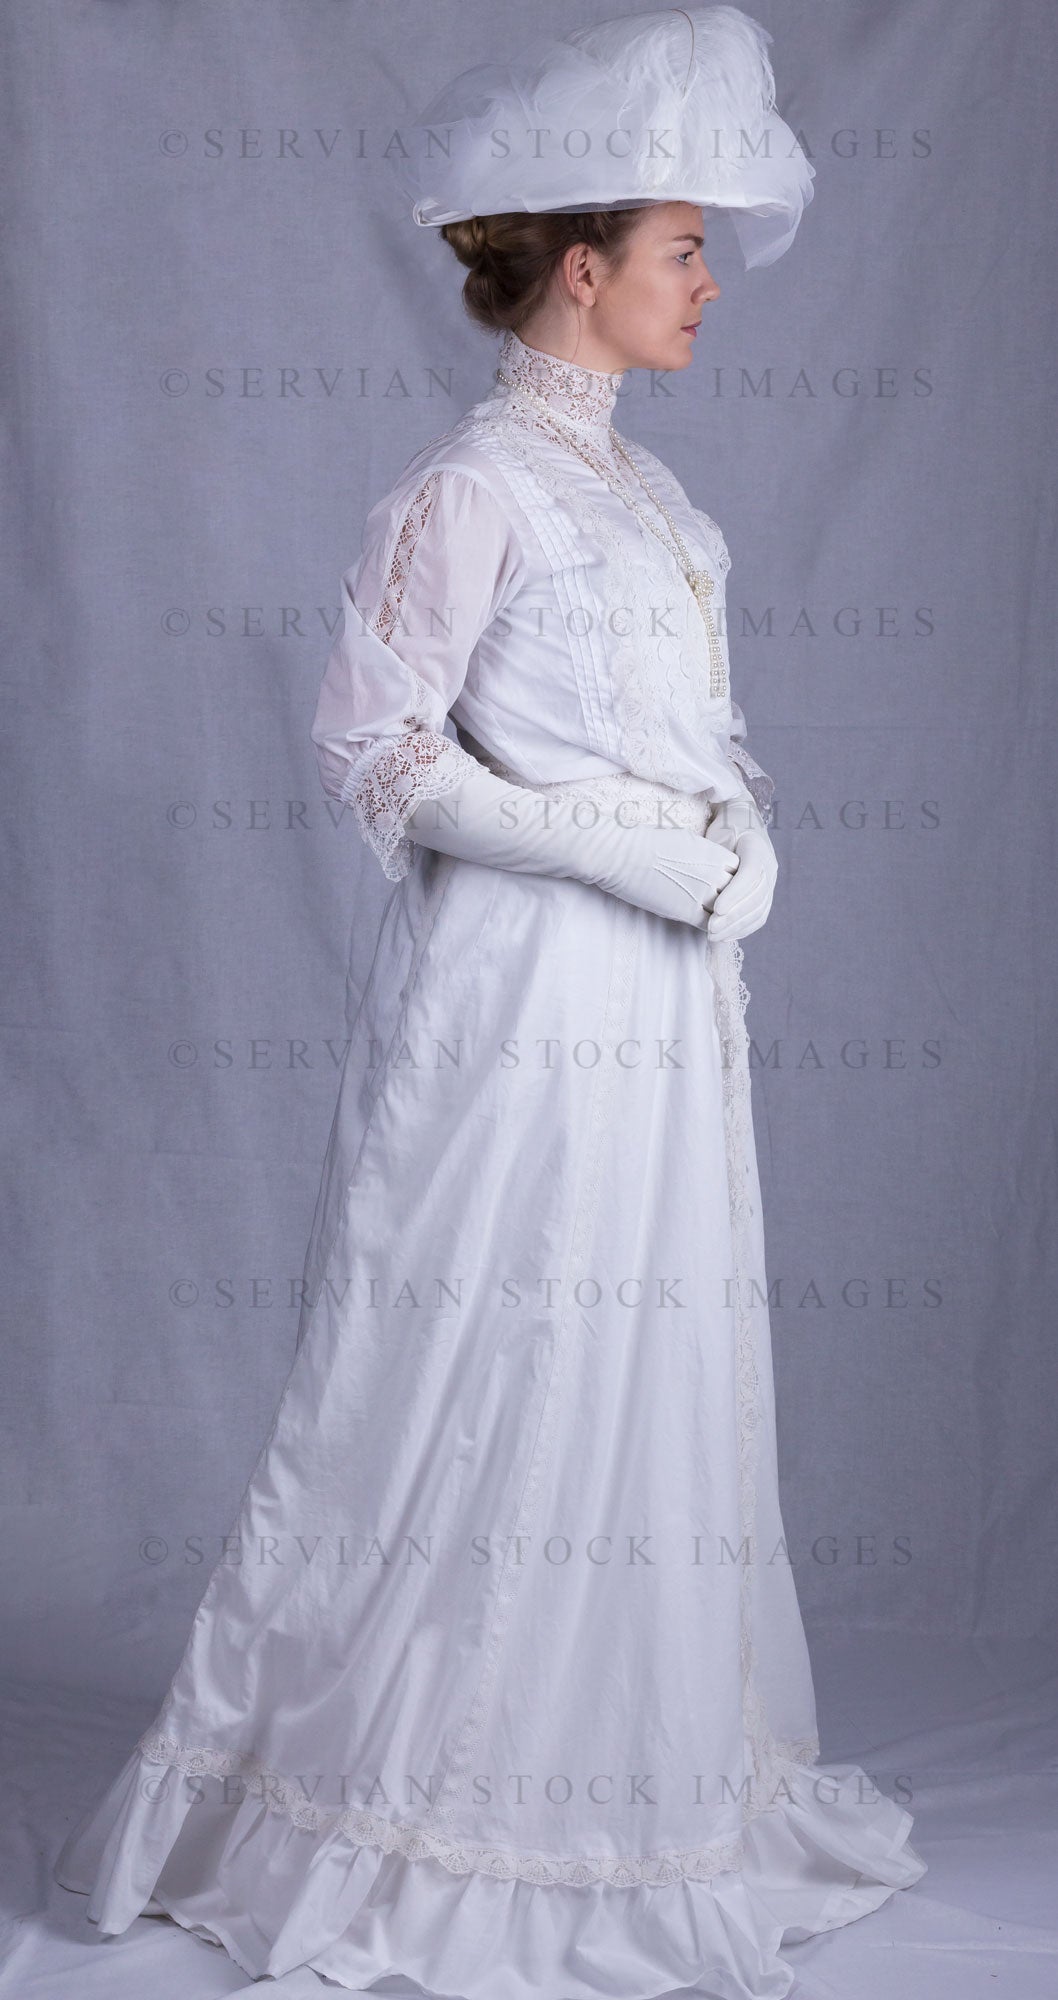 Edwardian woman in a white lace blouse and skirt with a pearl necklace (Tayla 0094)